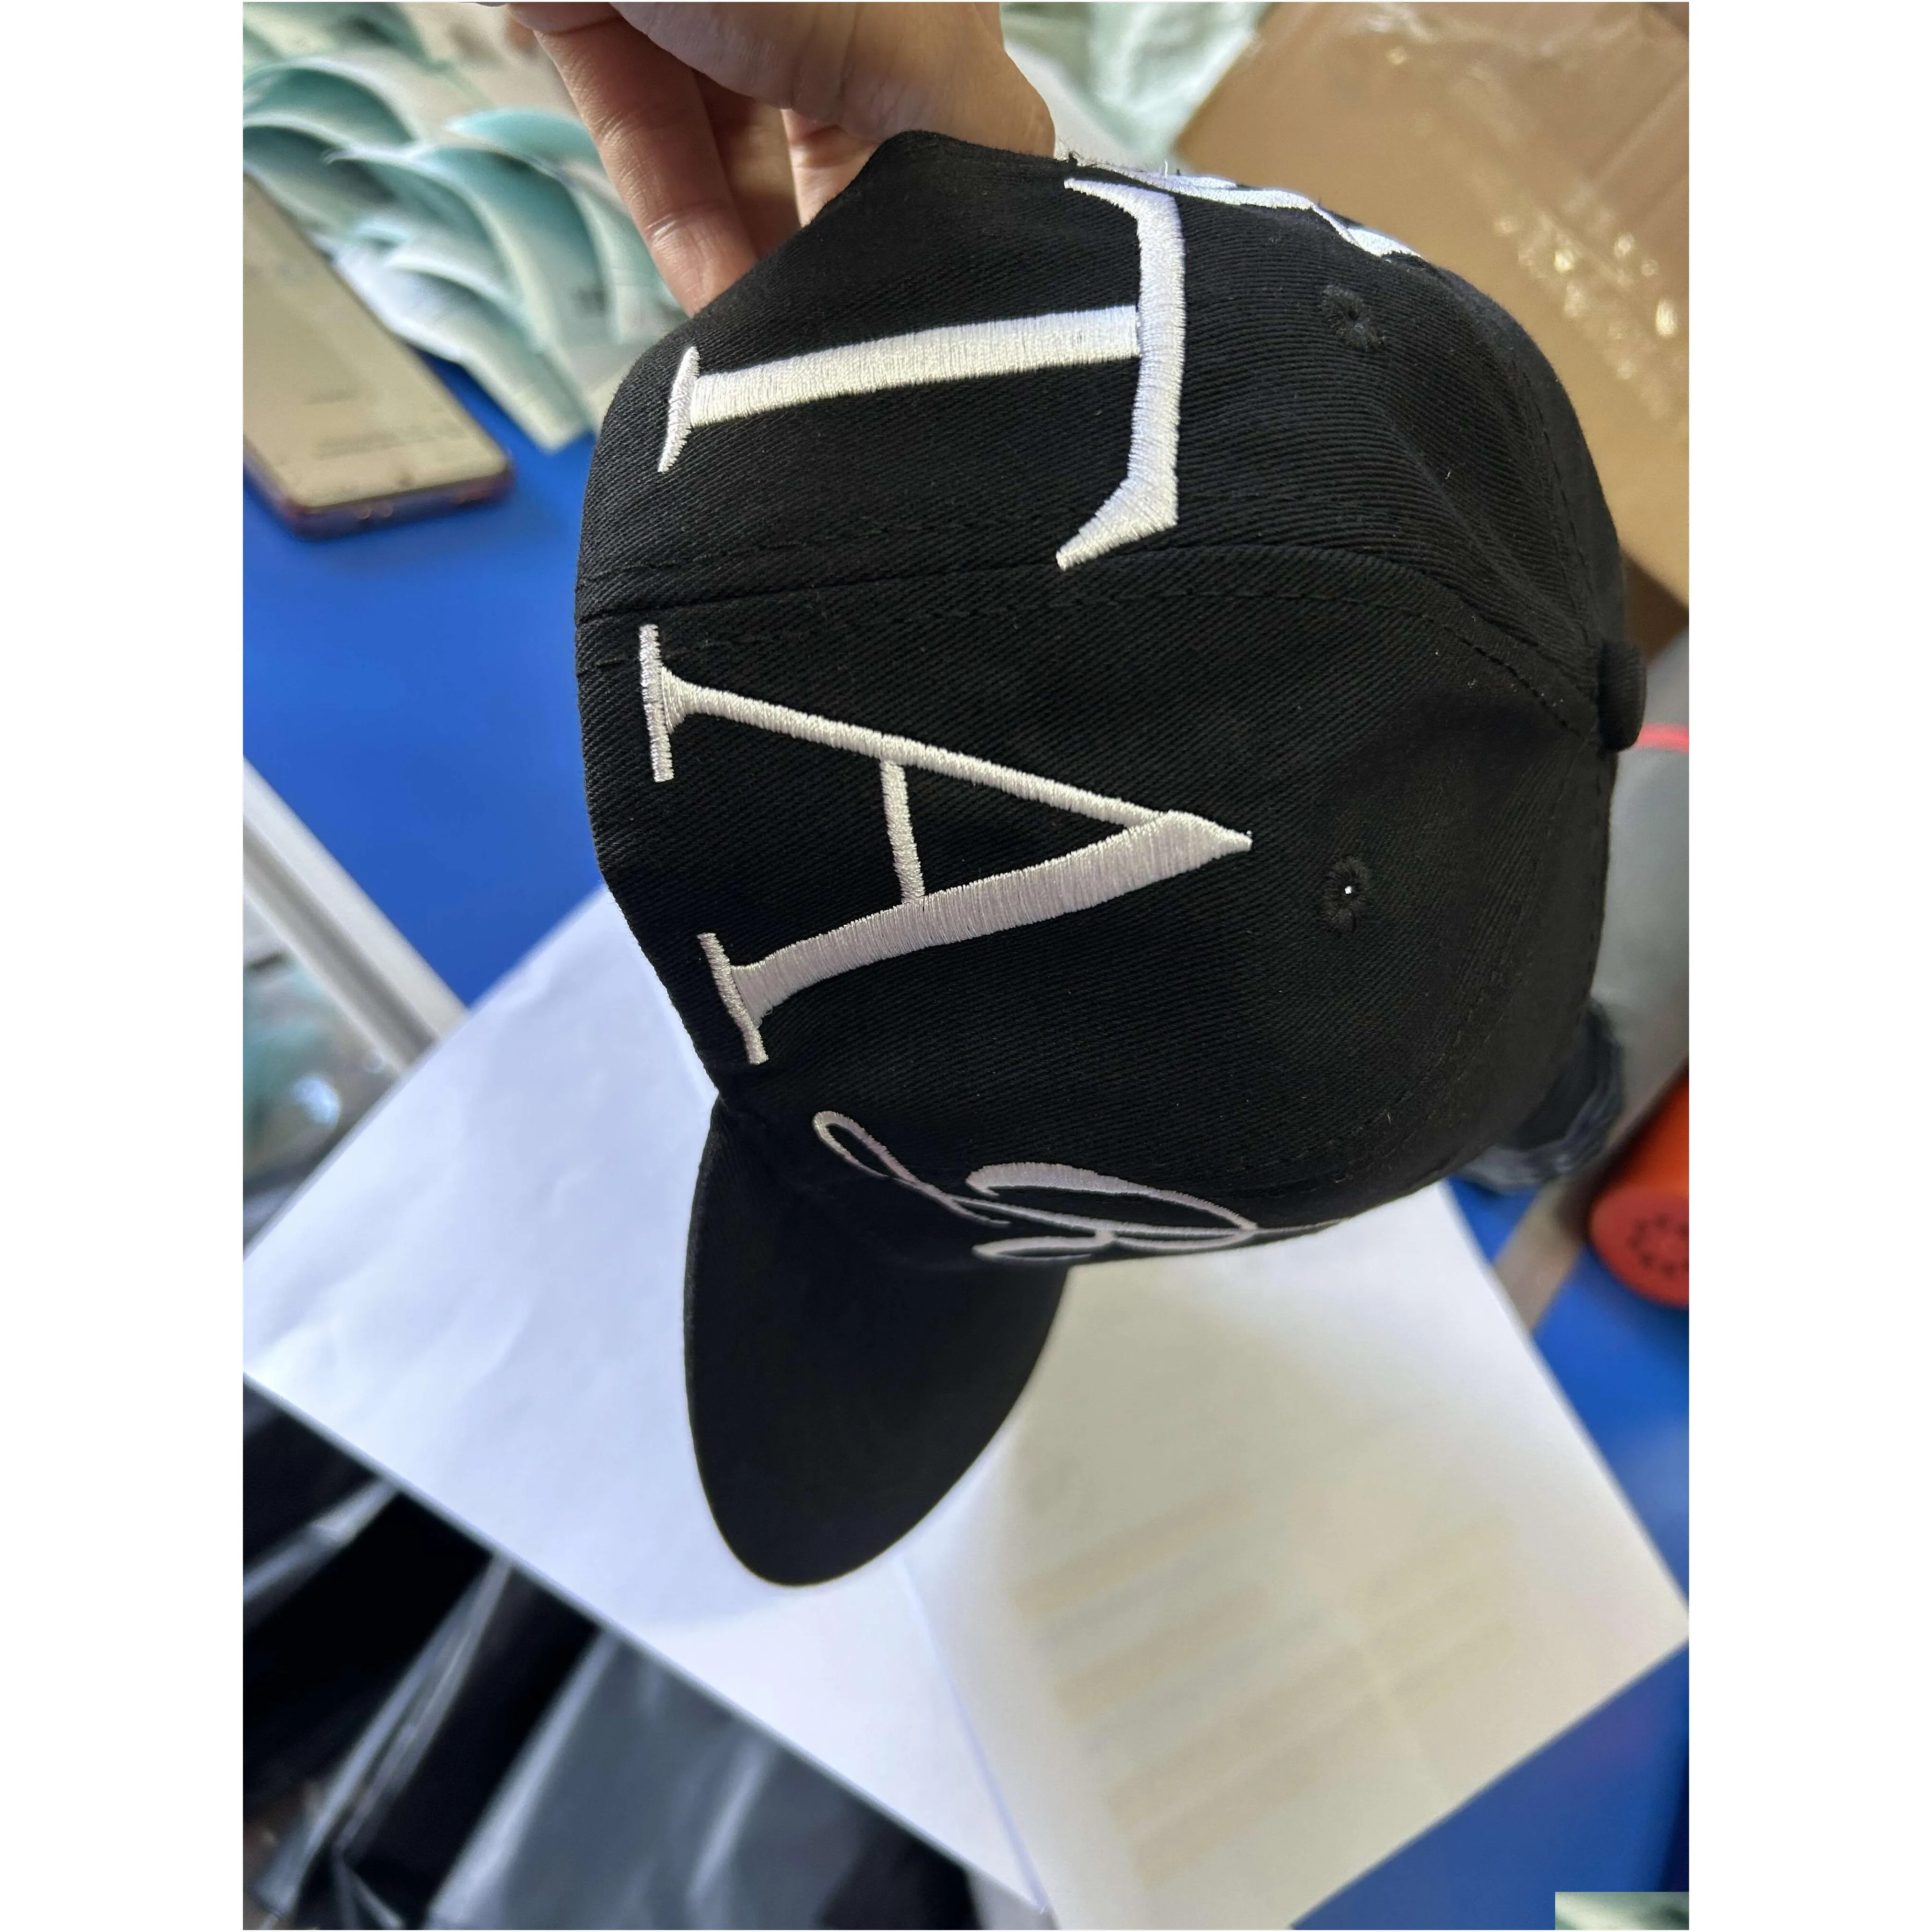 couple trapstar designer baseball cap sporty lettering embroidery casquette fashion accessories hats scarves